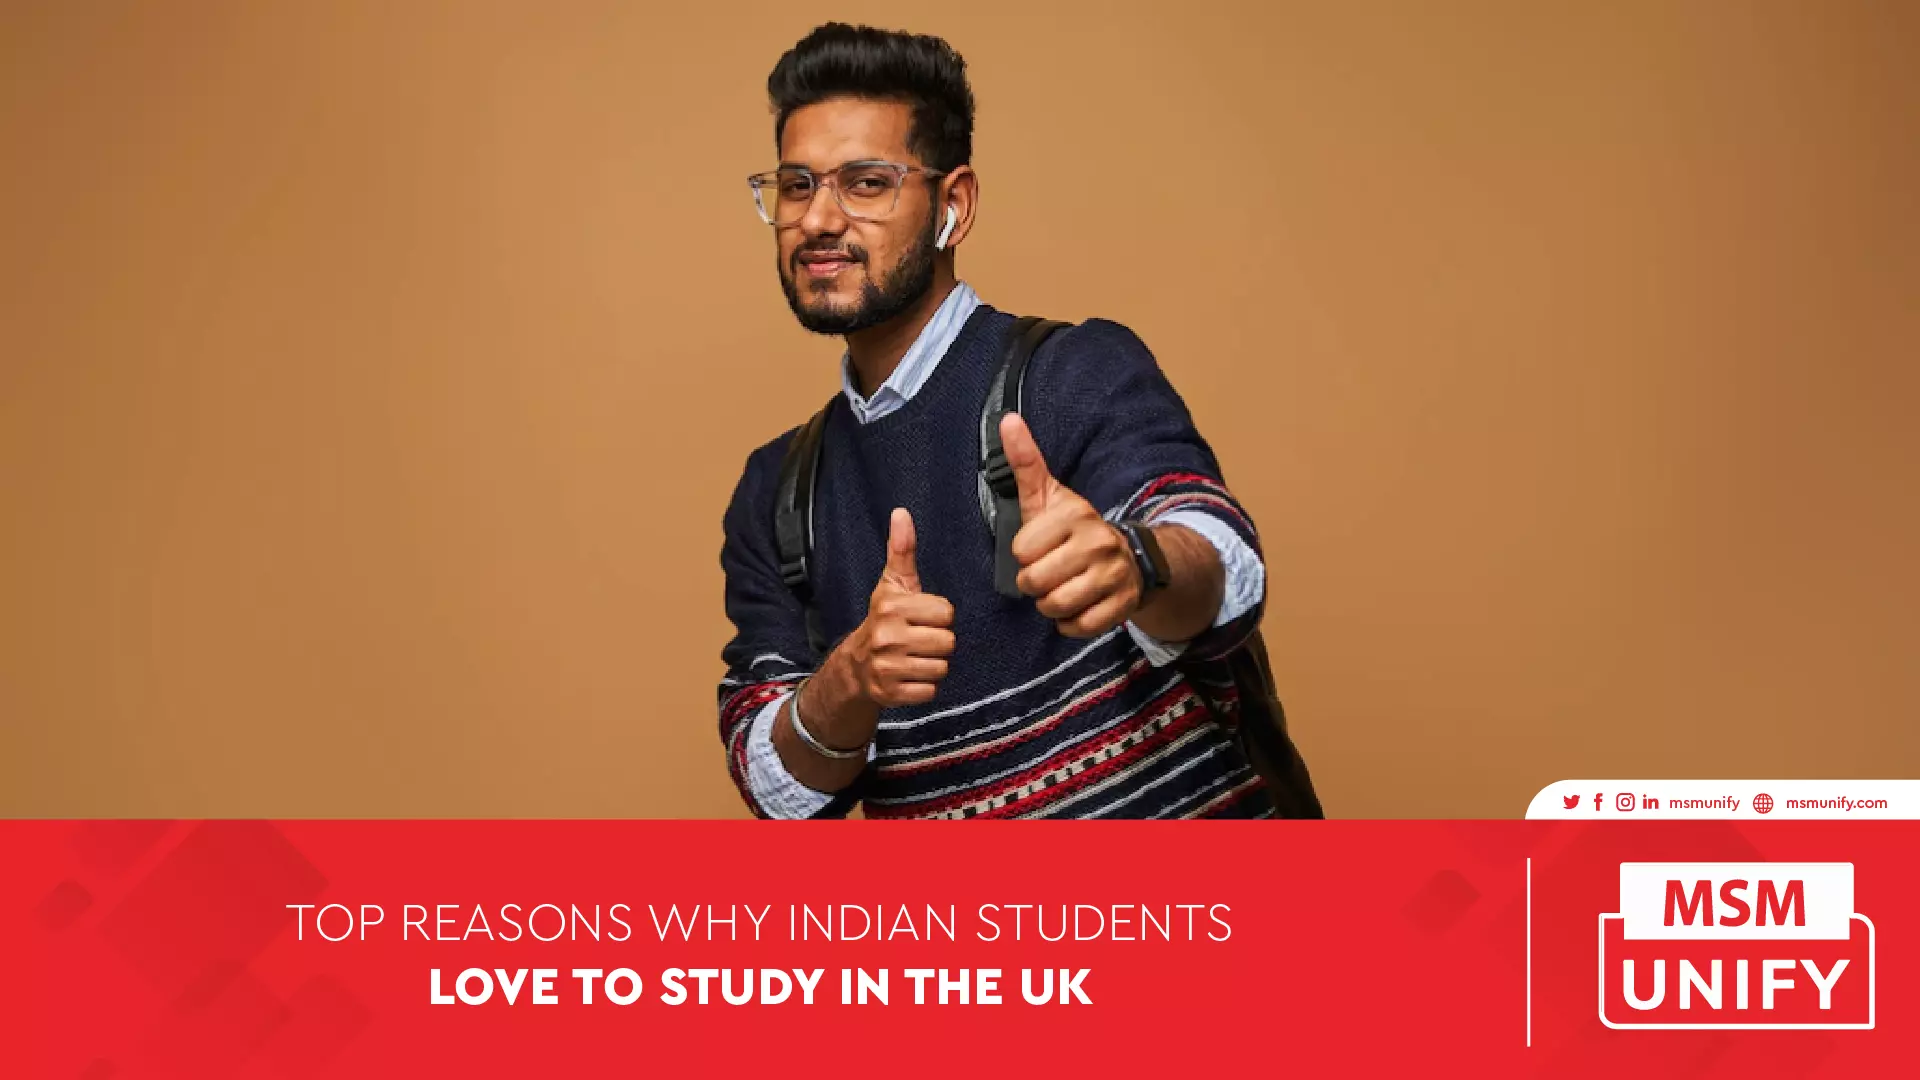 011223 MSM Unify Top Reasons Why Indian Students Love to Study in the UK 01